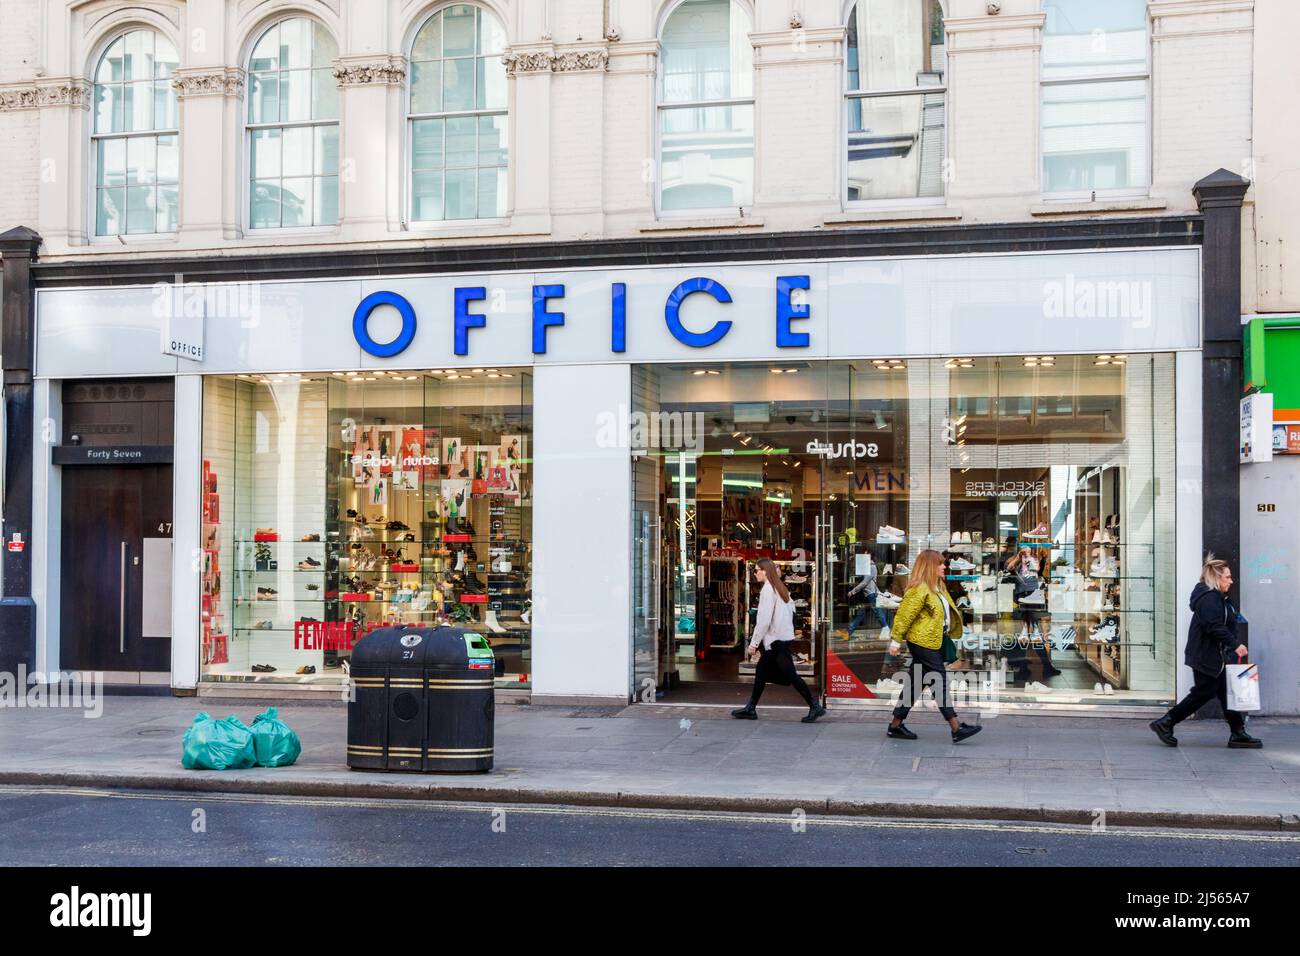 A branch of Office, the footwear retailer, in Oxford Street, London, UK Stock Photo